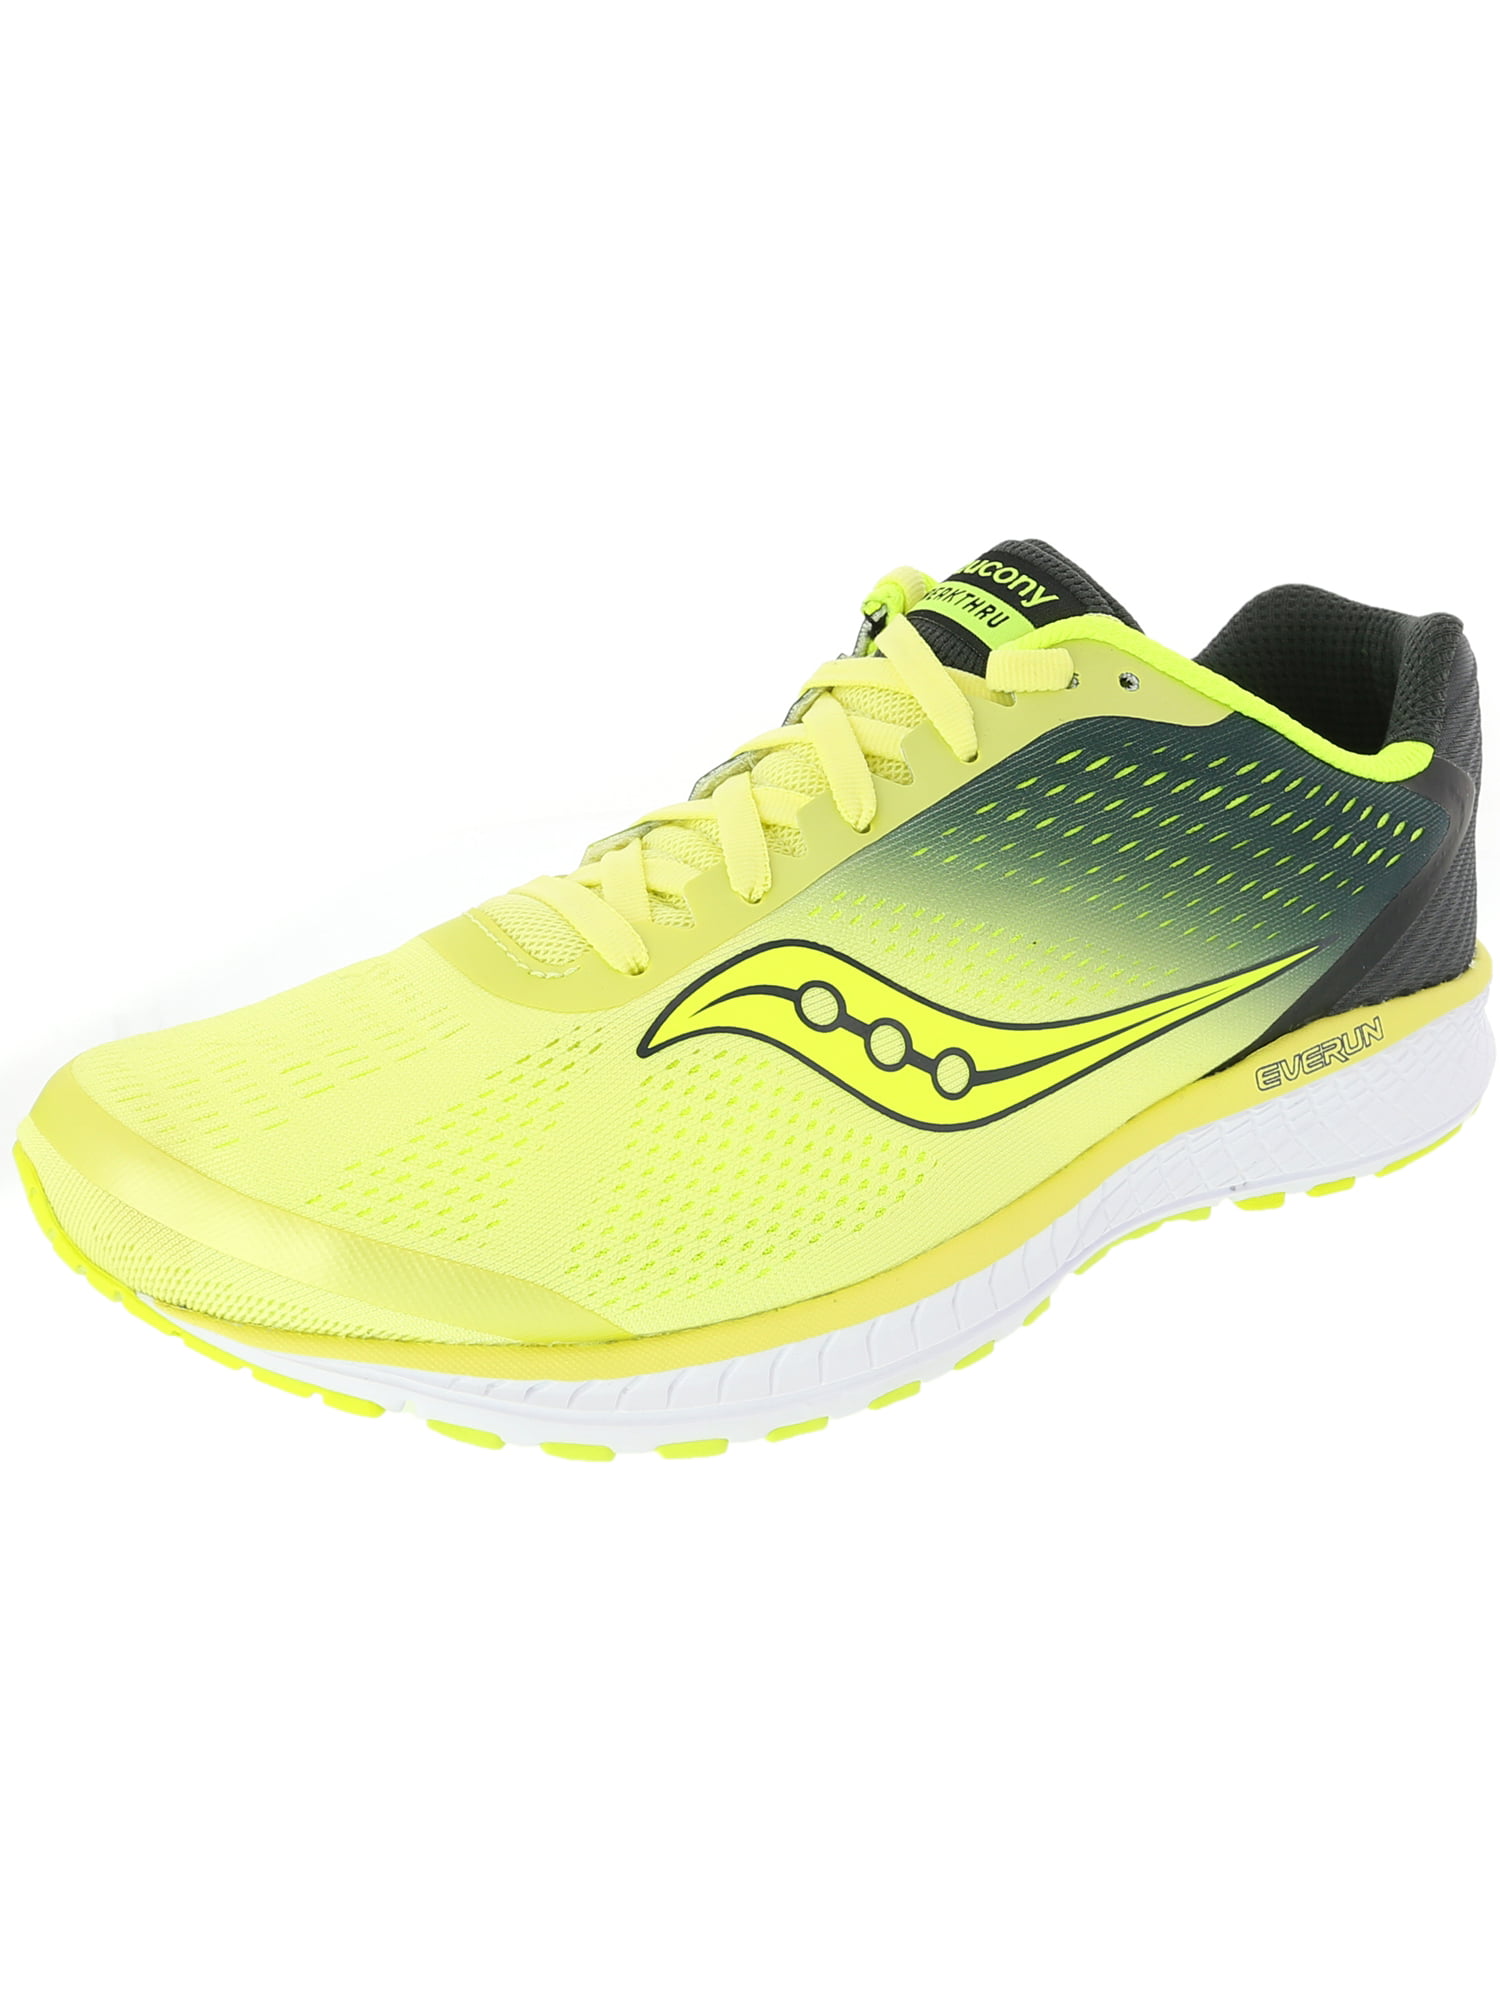 Ankle-High Running Shoe - 6.5 